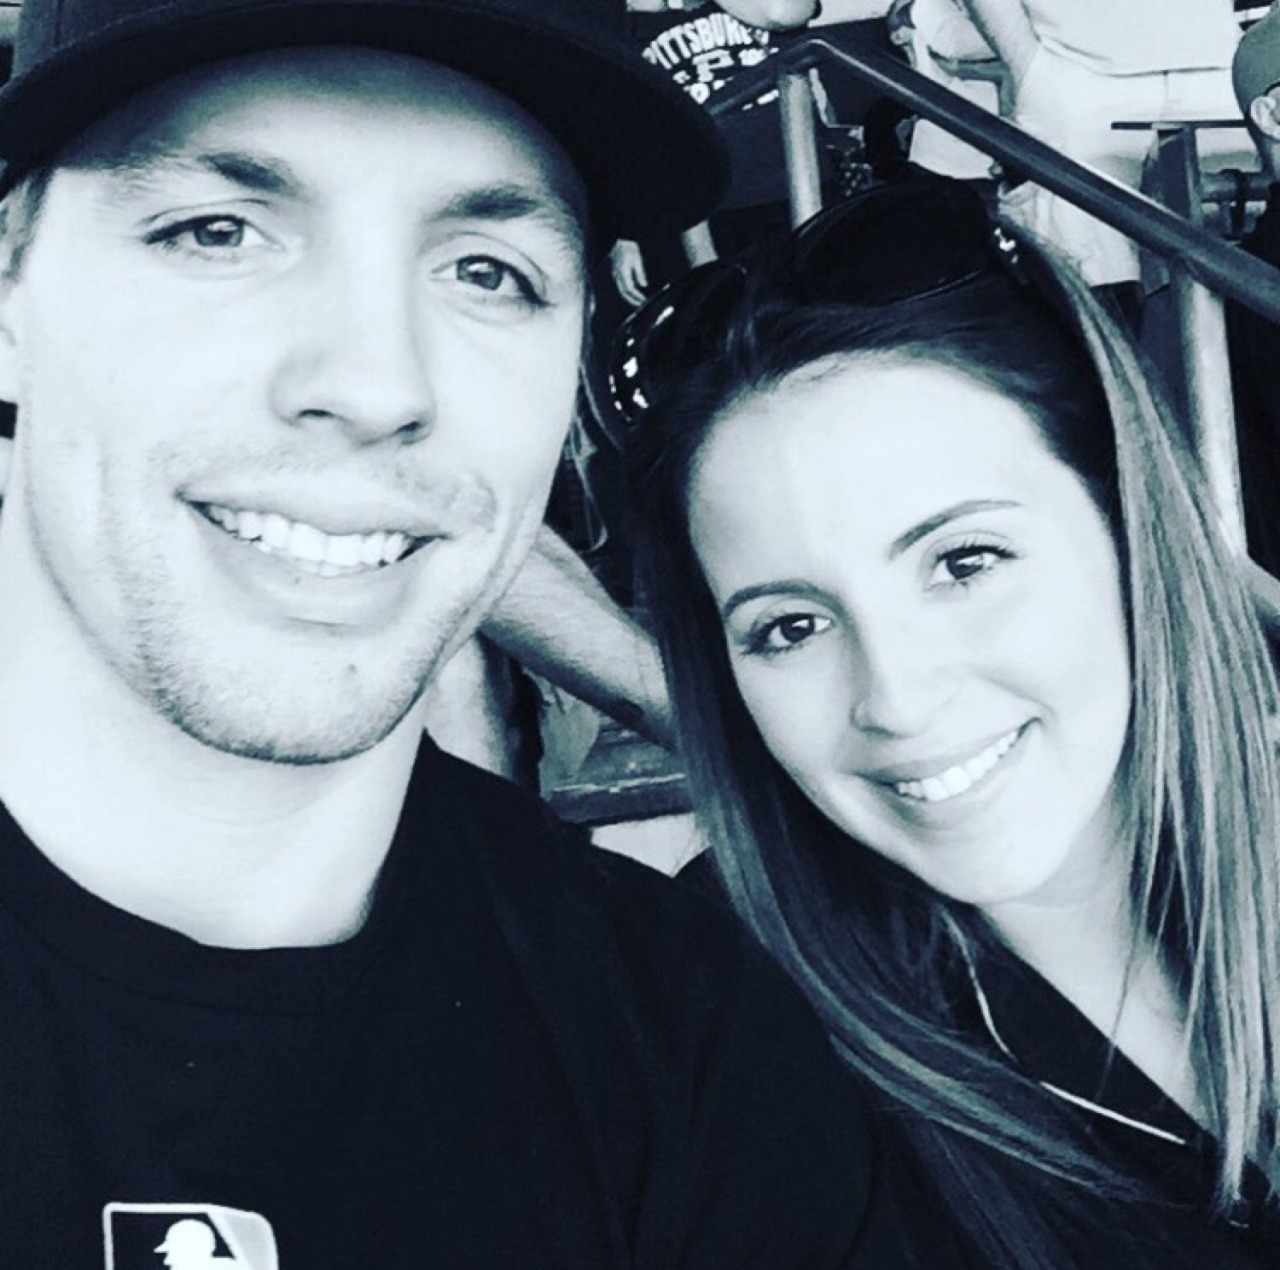 Wives and Girlfriends of NHL players — Congrats to David Perron